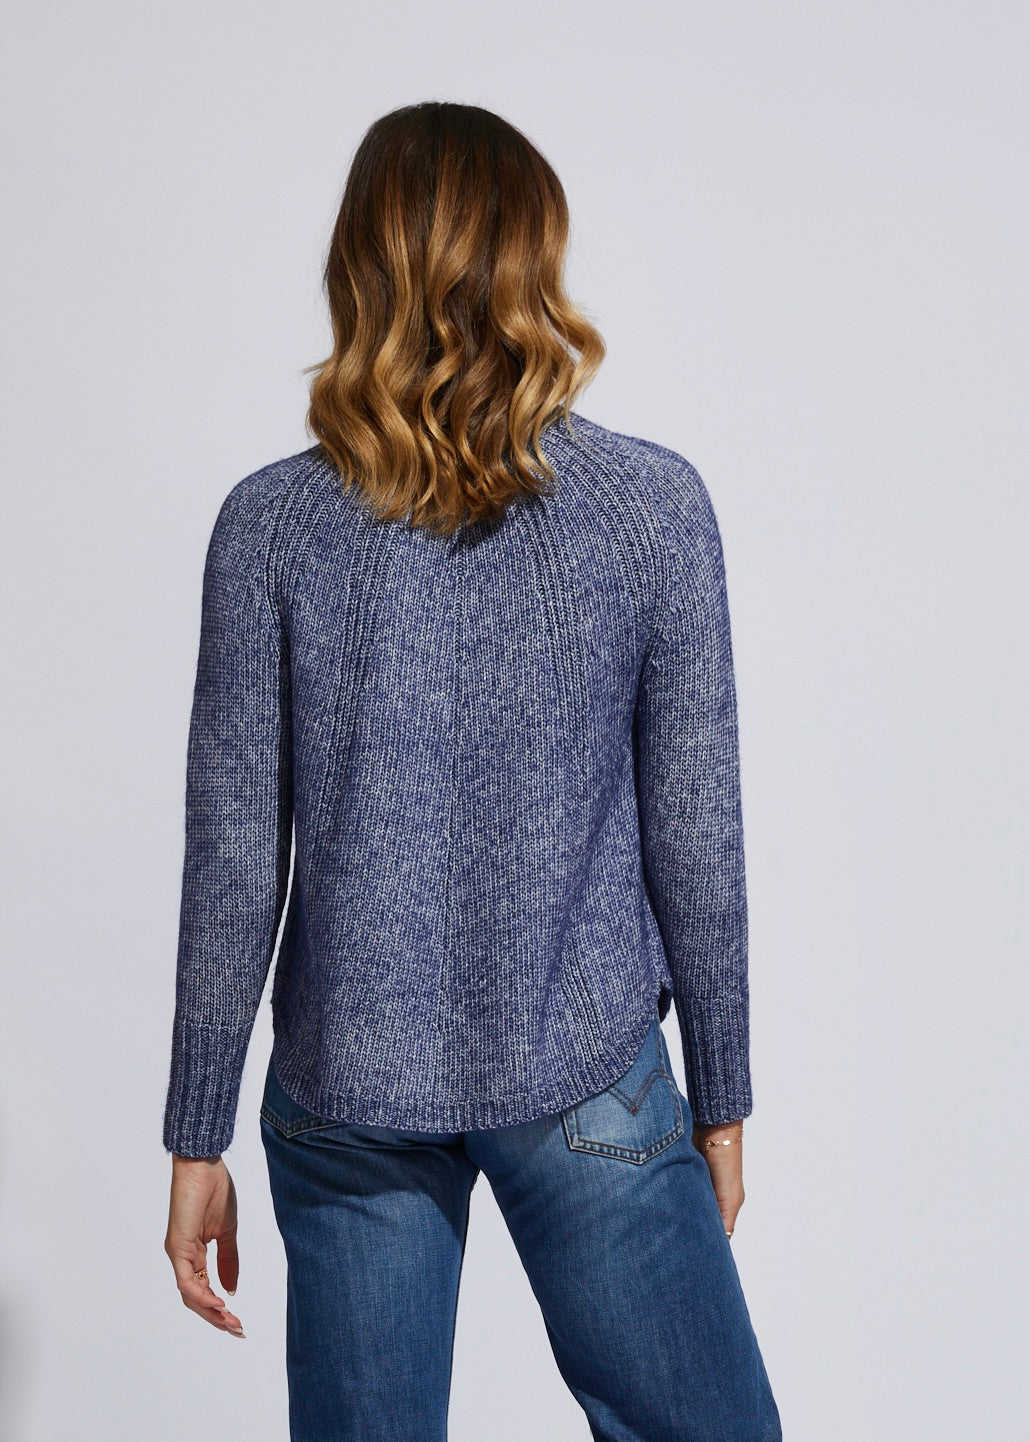 LD & CO MOULINE JUMPER - GALACTIC - THE VOGUE STORE